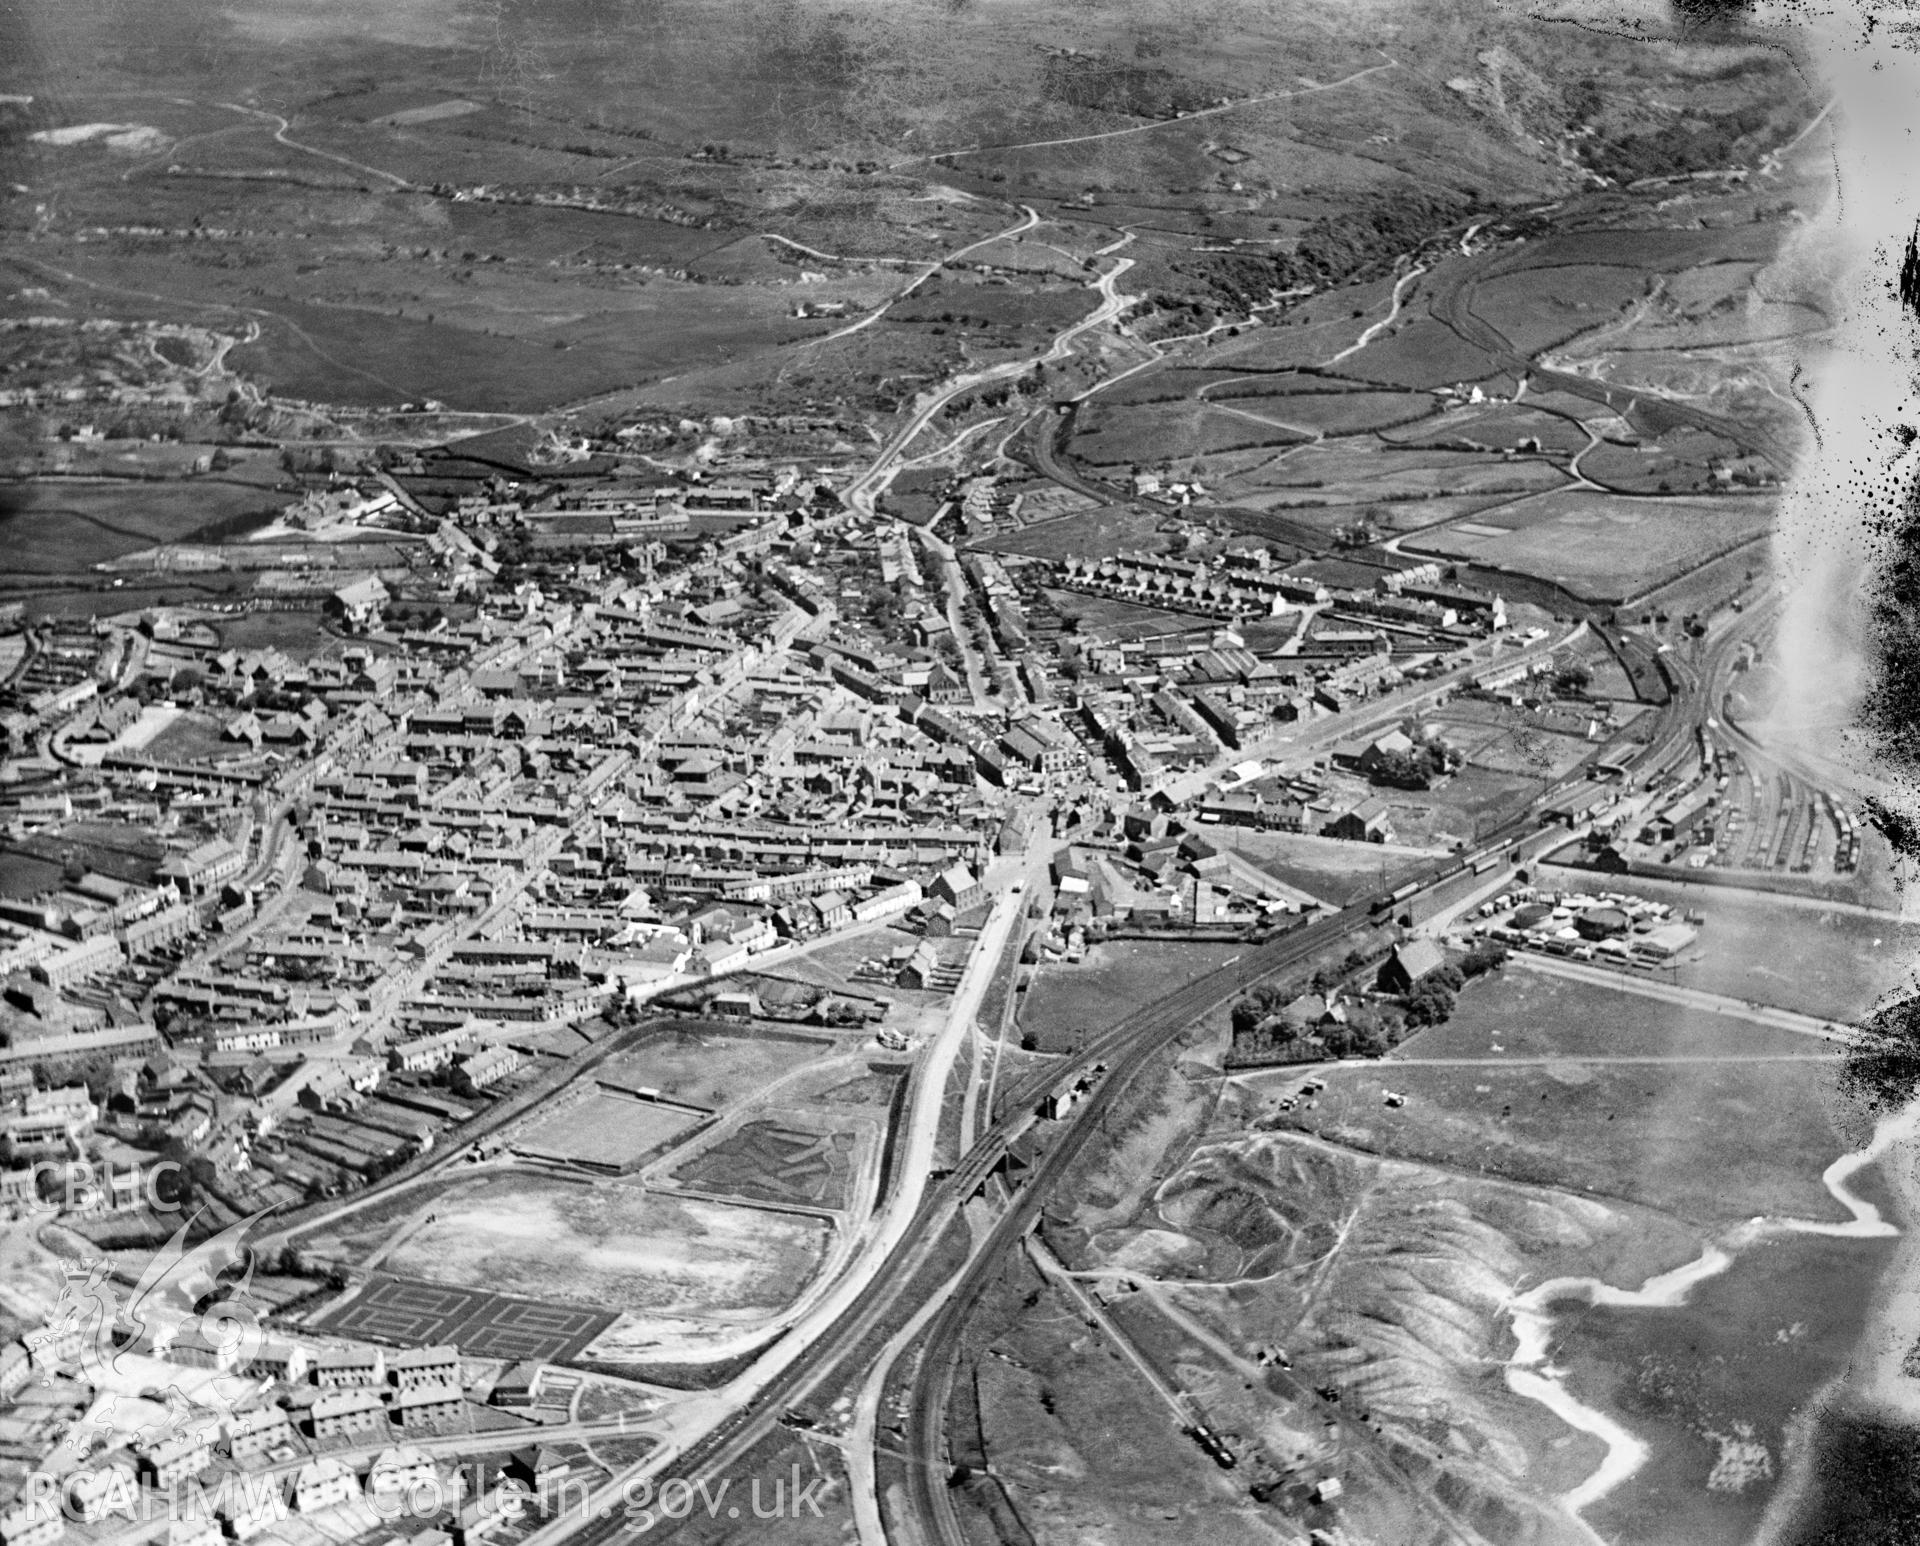 View of Brynmawr, oblique aerial view. 5?x4? black and white glass plate negative.